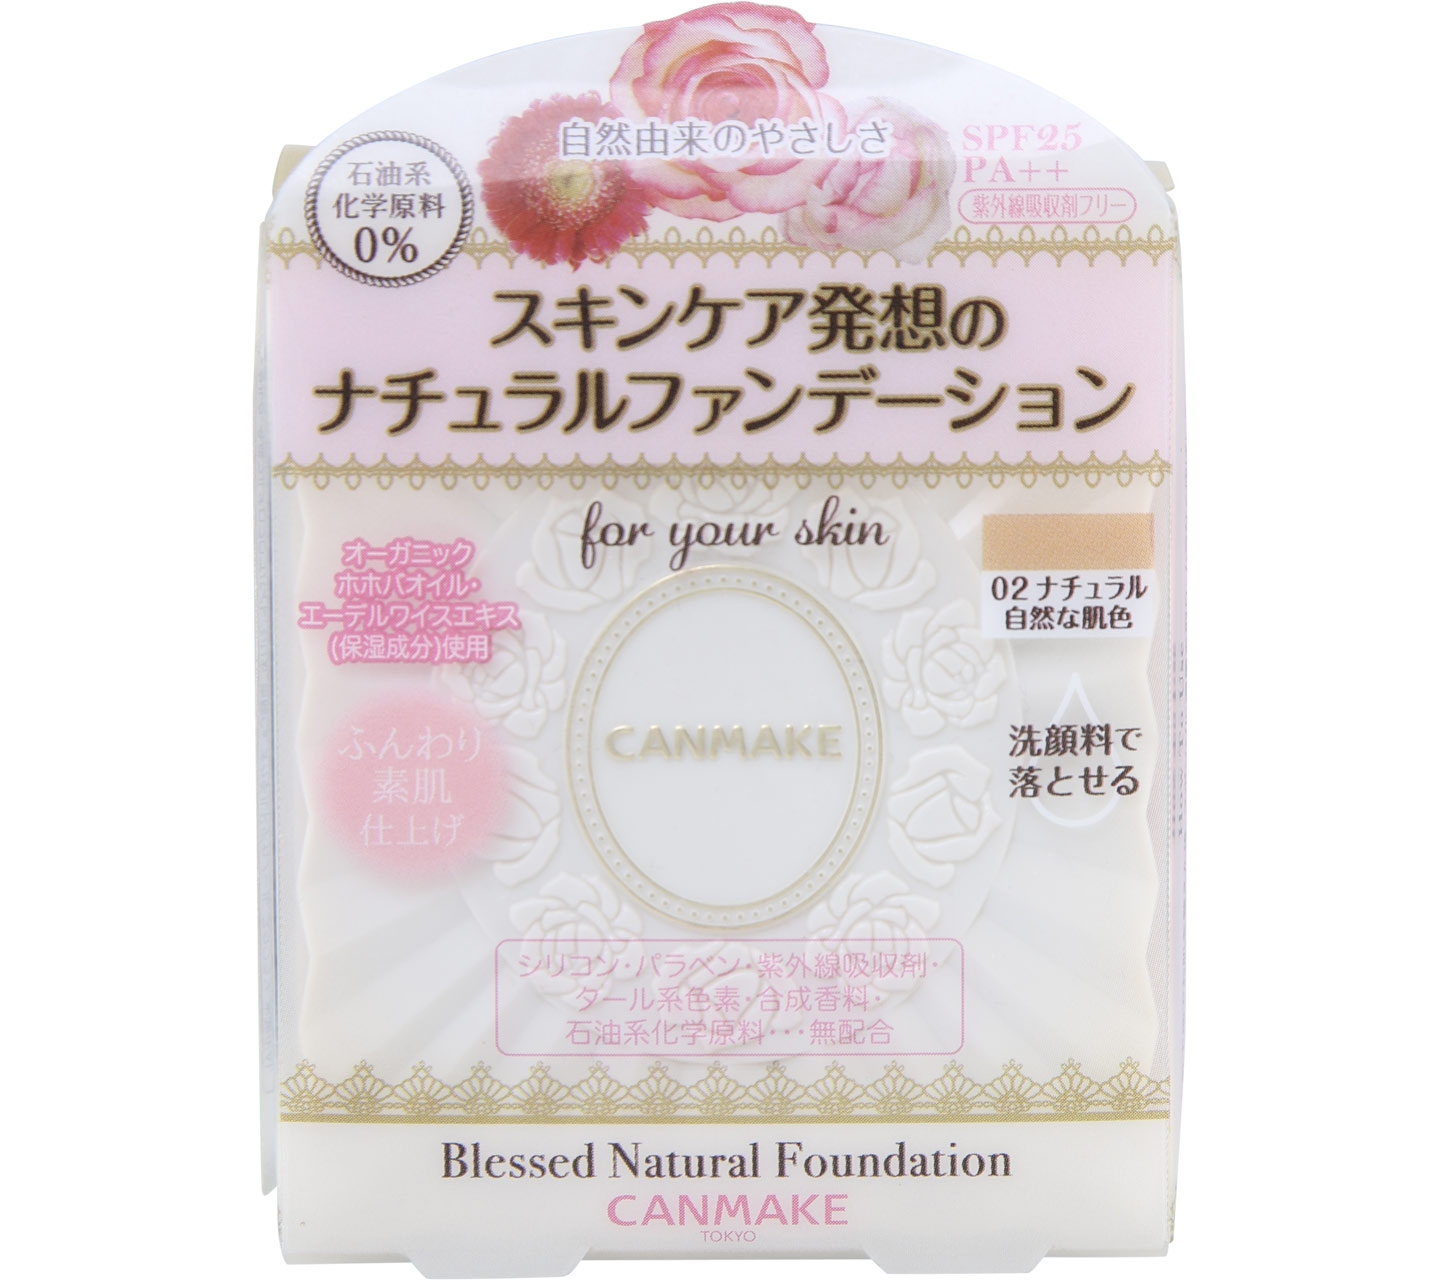 Canmake Blessed Natural Foundation 02 Faces